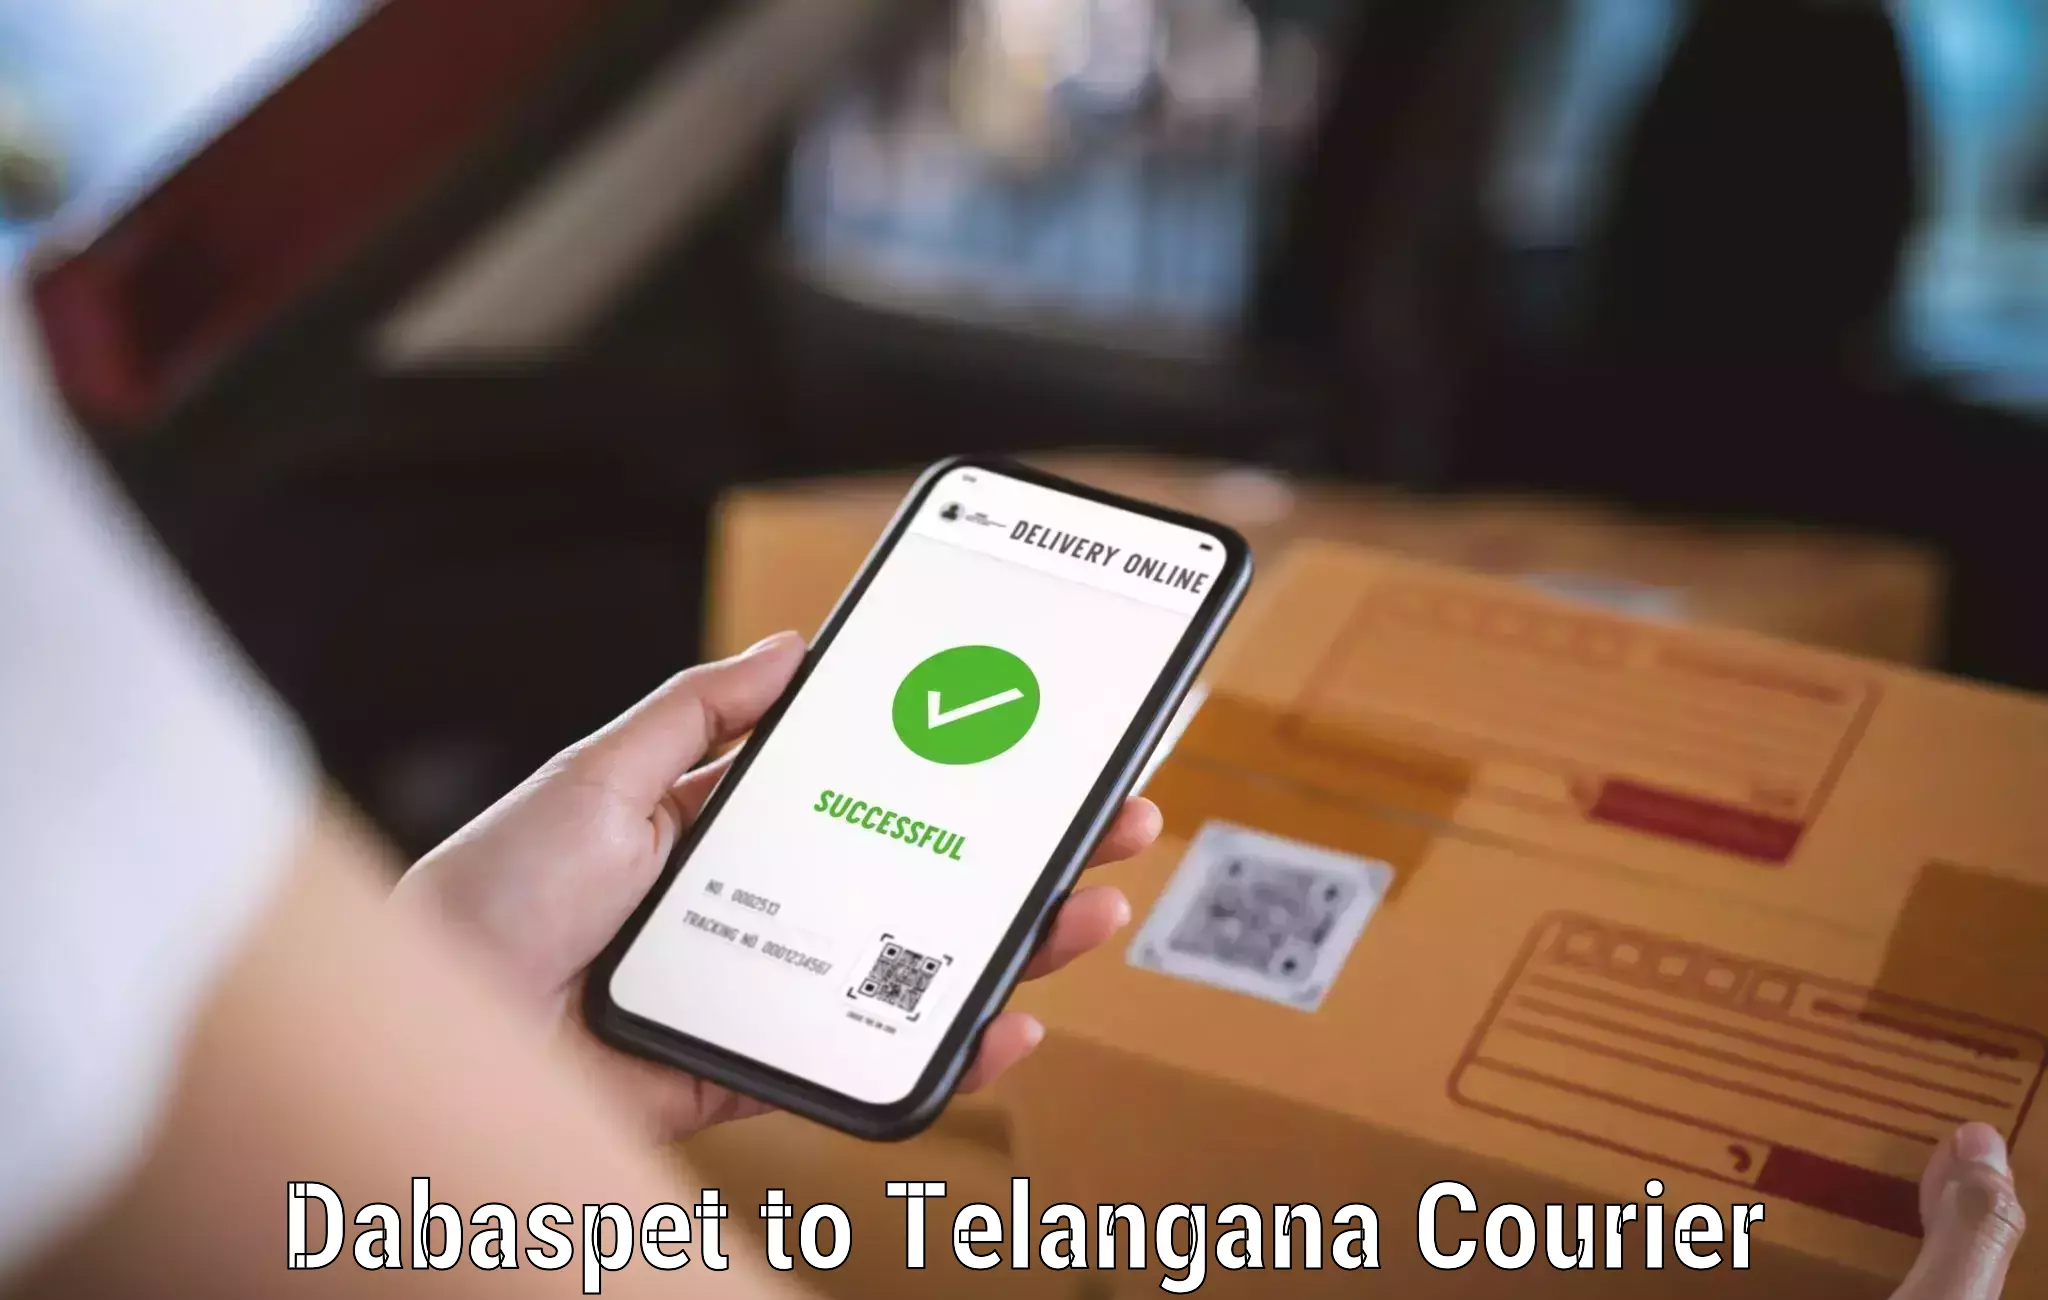 Courier dispatch services in Dabaspet to Kalwakurthy